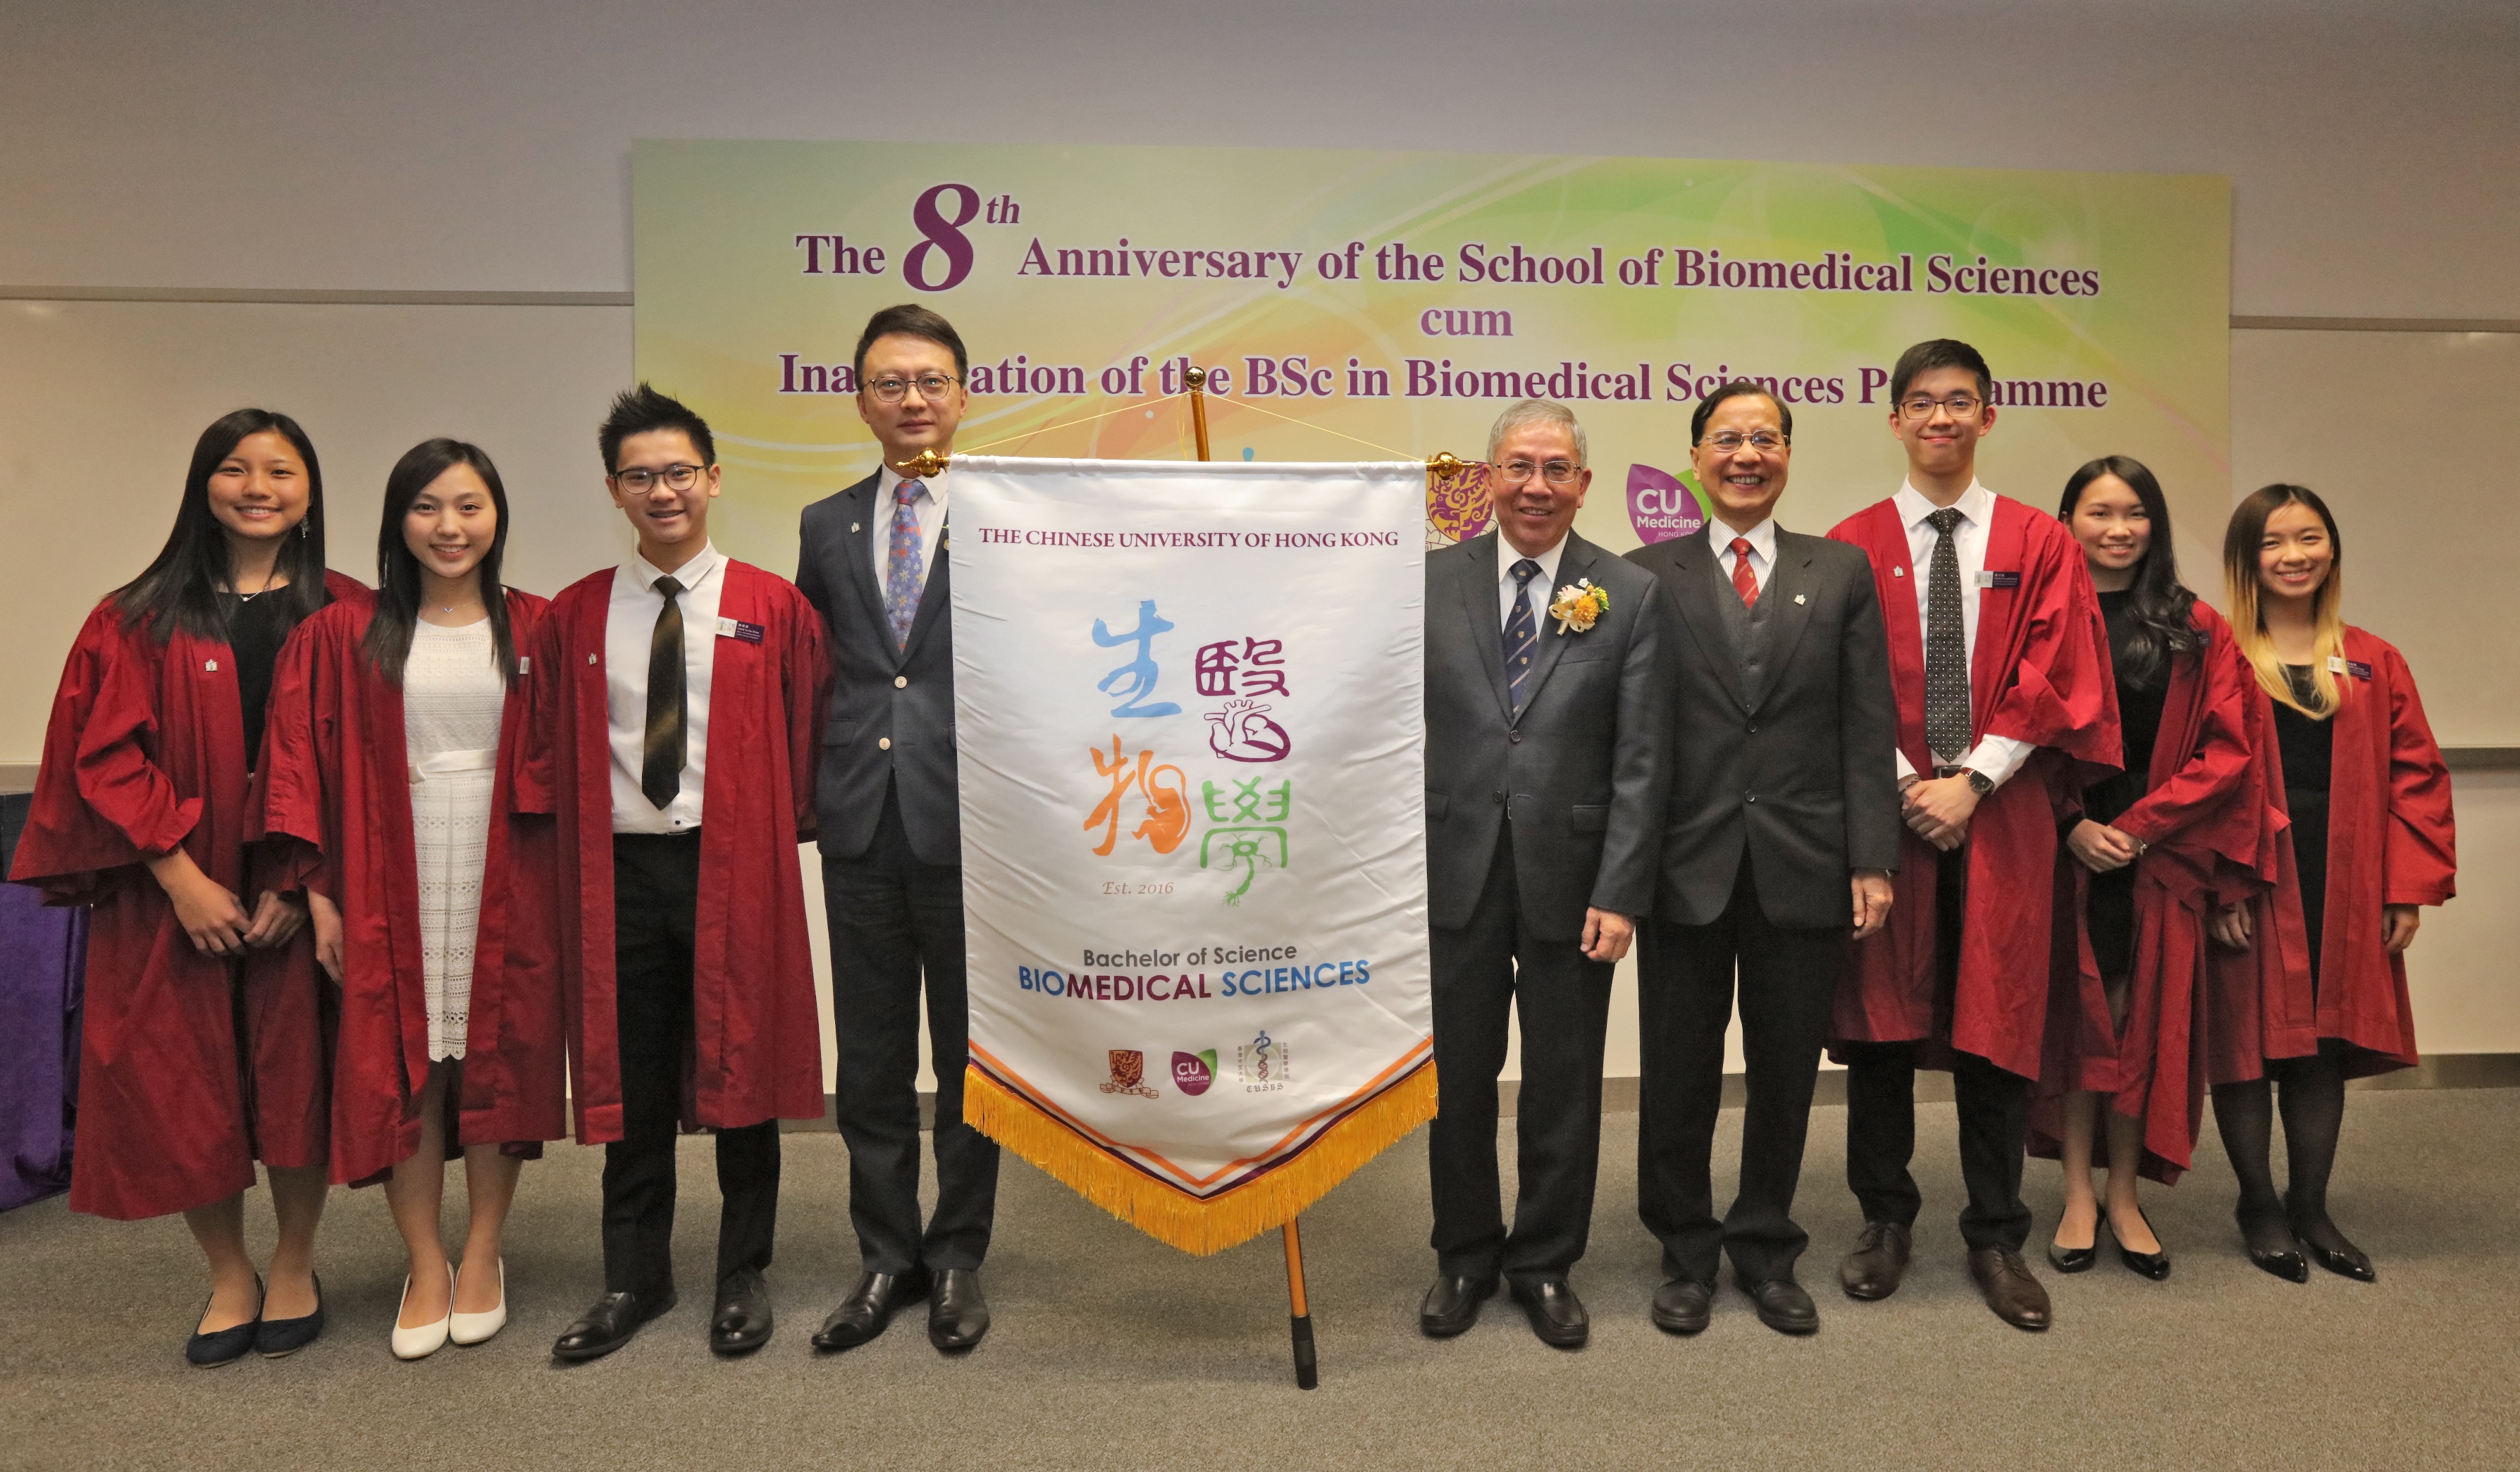 Prof. Francis CHAN, Dean of the Faculty of Medicine at CUHK (4th from left) , presents a flag to Prof. Wai-Yee CHAN, Director of the School of Biomedical Sciences (5th from right); Prof. Kwok-Pui FUNG, Programme Director of BSc in Biomedical Sciences Programme (4th from right) and student representatives, to represent the official inauguration of the BSc in Biomedical Sciences Programme. 